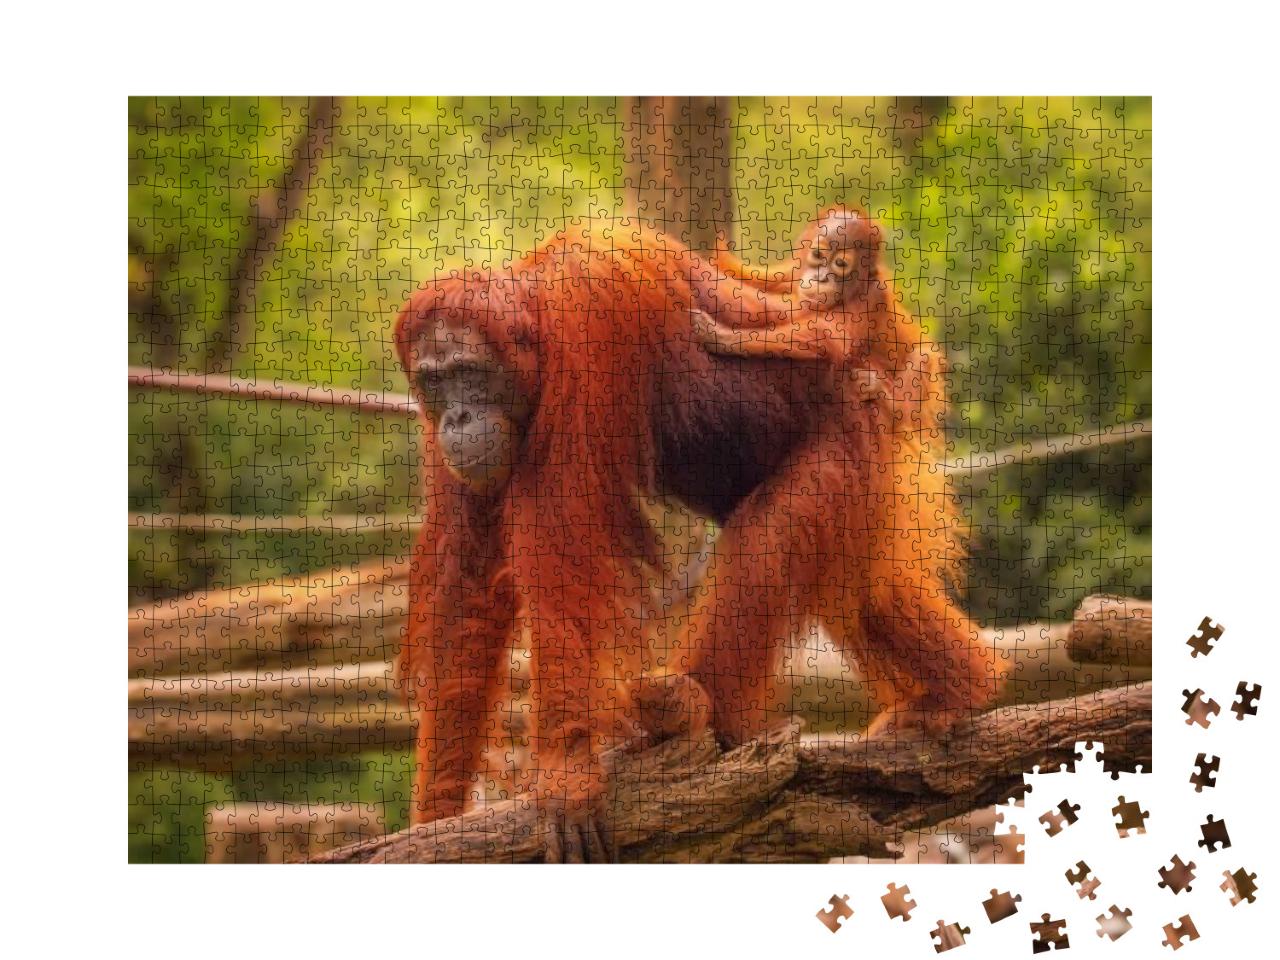 Young Orangutan is Sleeping on Its Mother... Jigsaw Puzzle with 1000 pieces